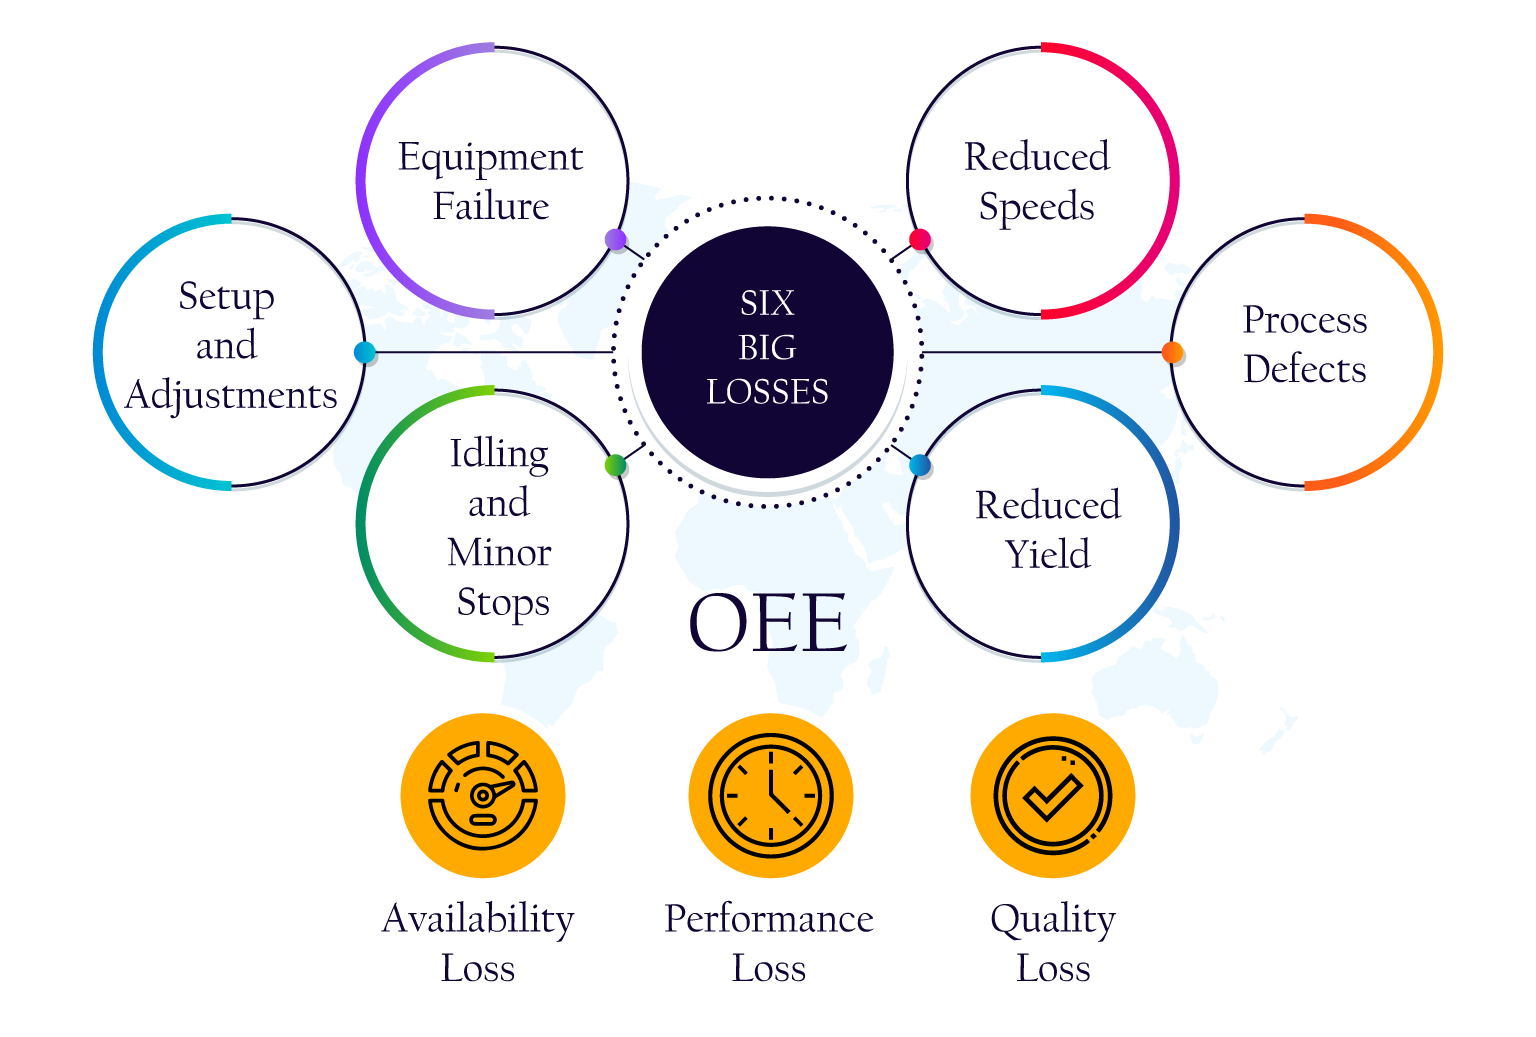 How the Six Big Losses in Manufacturing aligns with OEE Factors